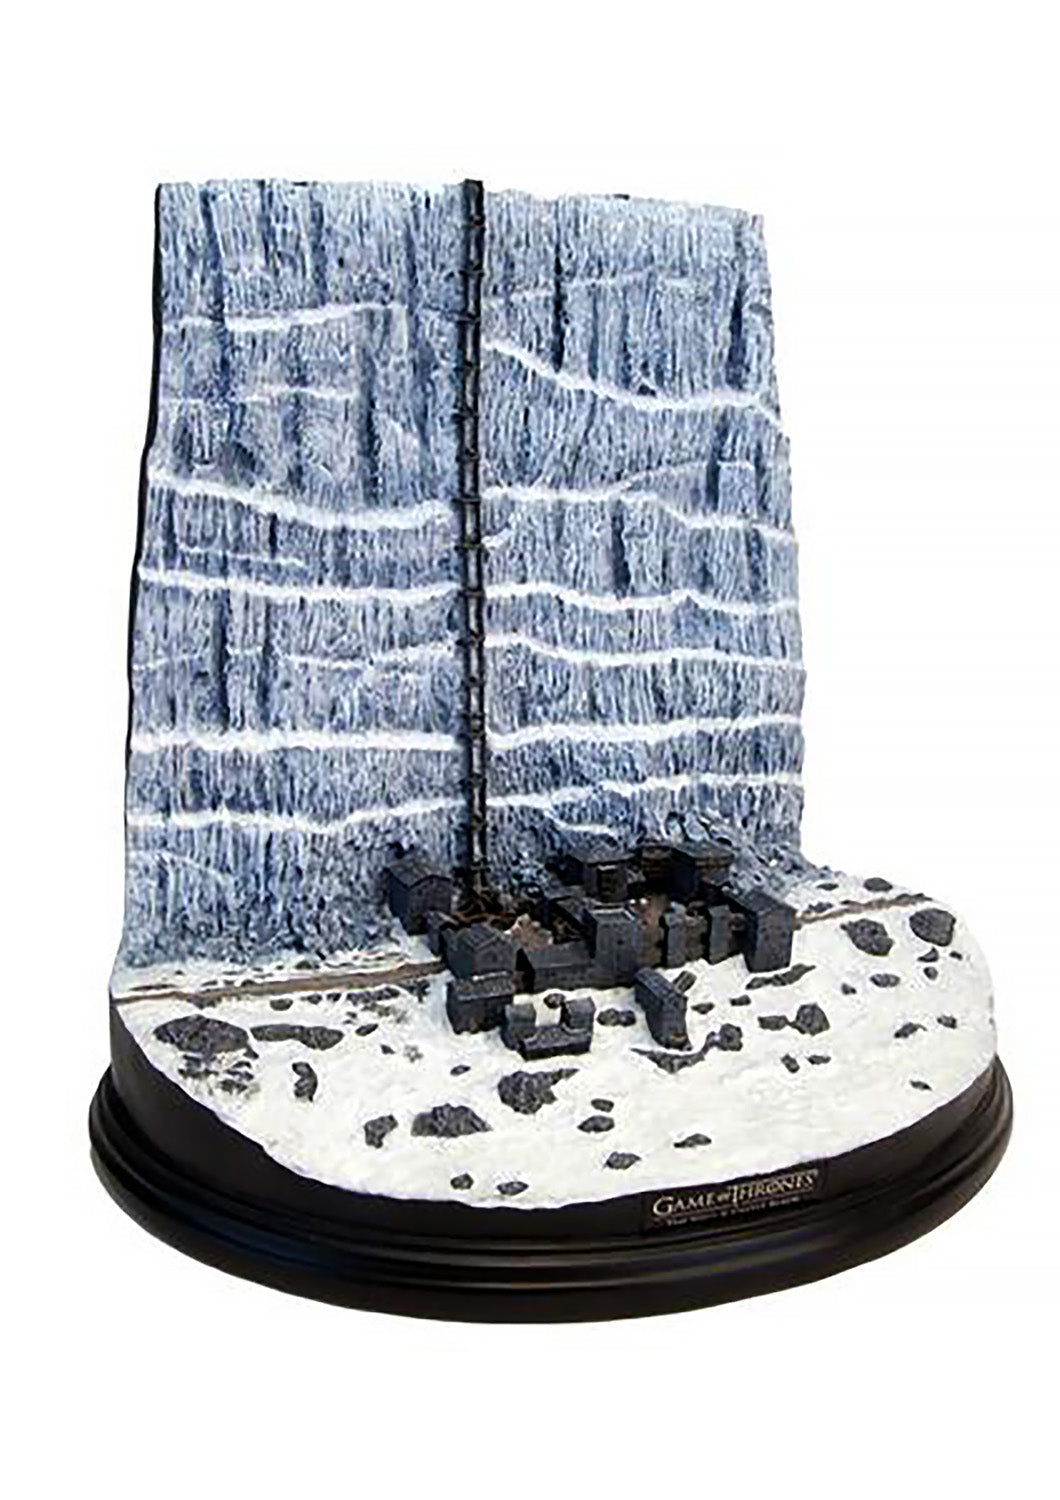 FACTORY ENTERTAINMENT GAME OF THRONES CASTLE BLACK AND THE WALL DESKTOP SCULPTURE - Anotoys Collectibles